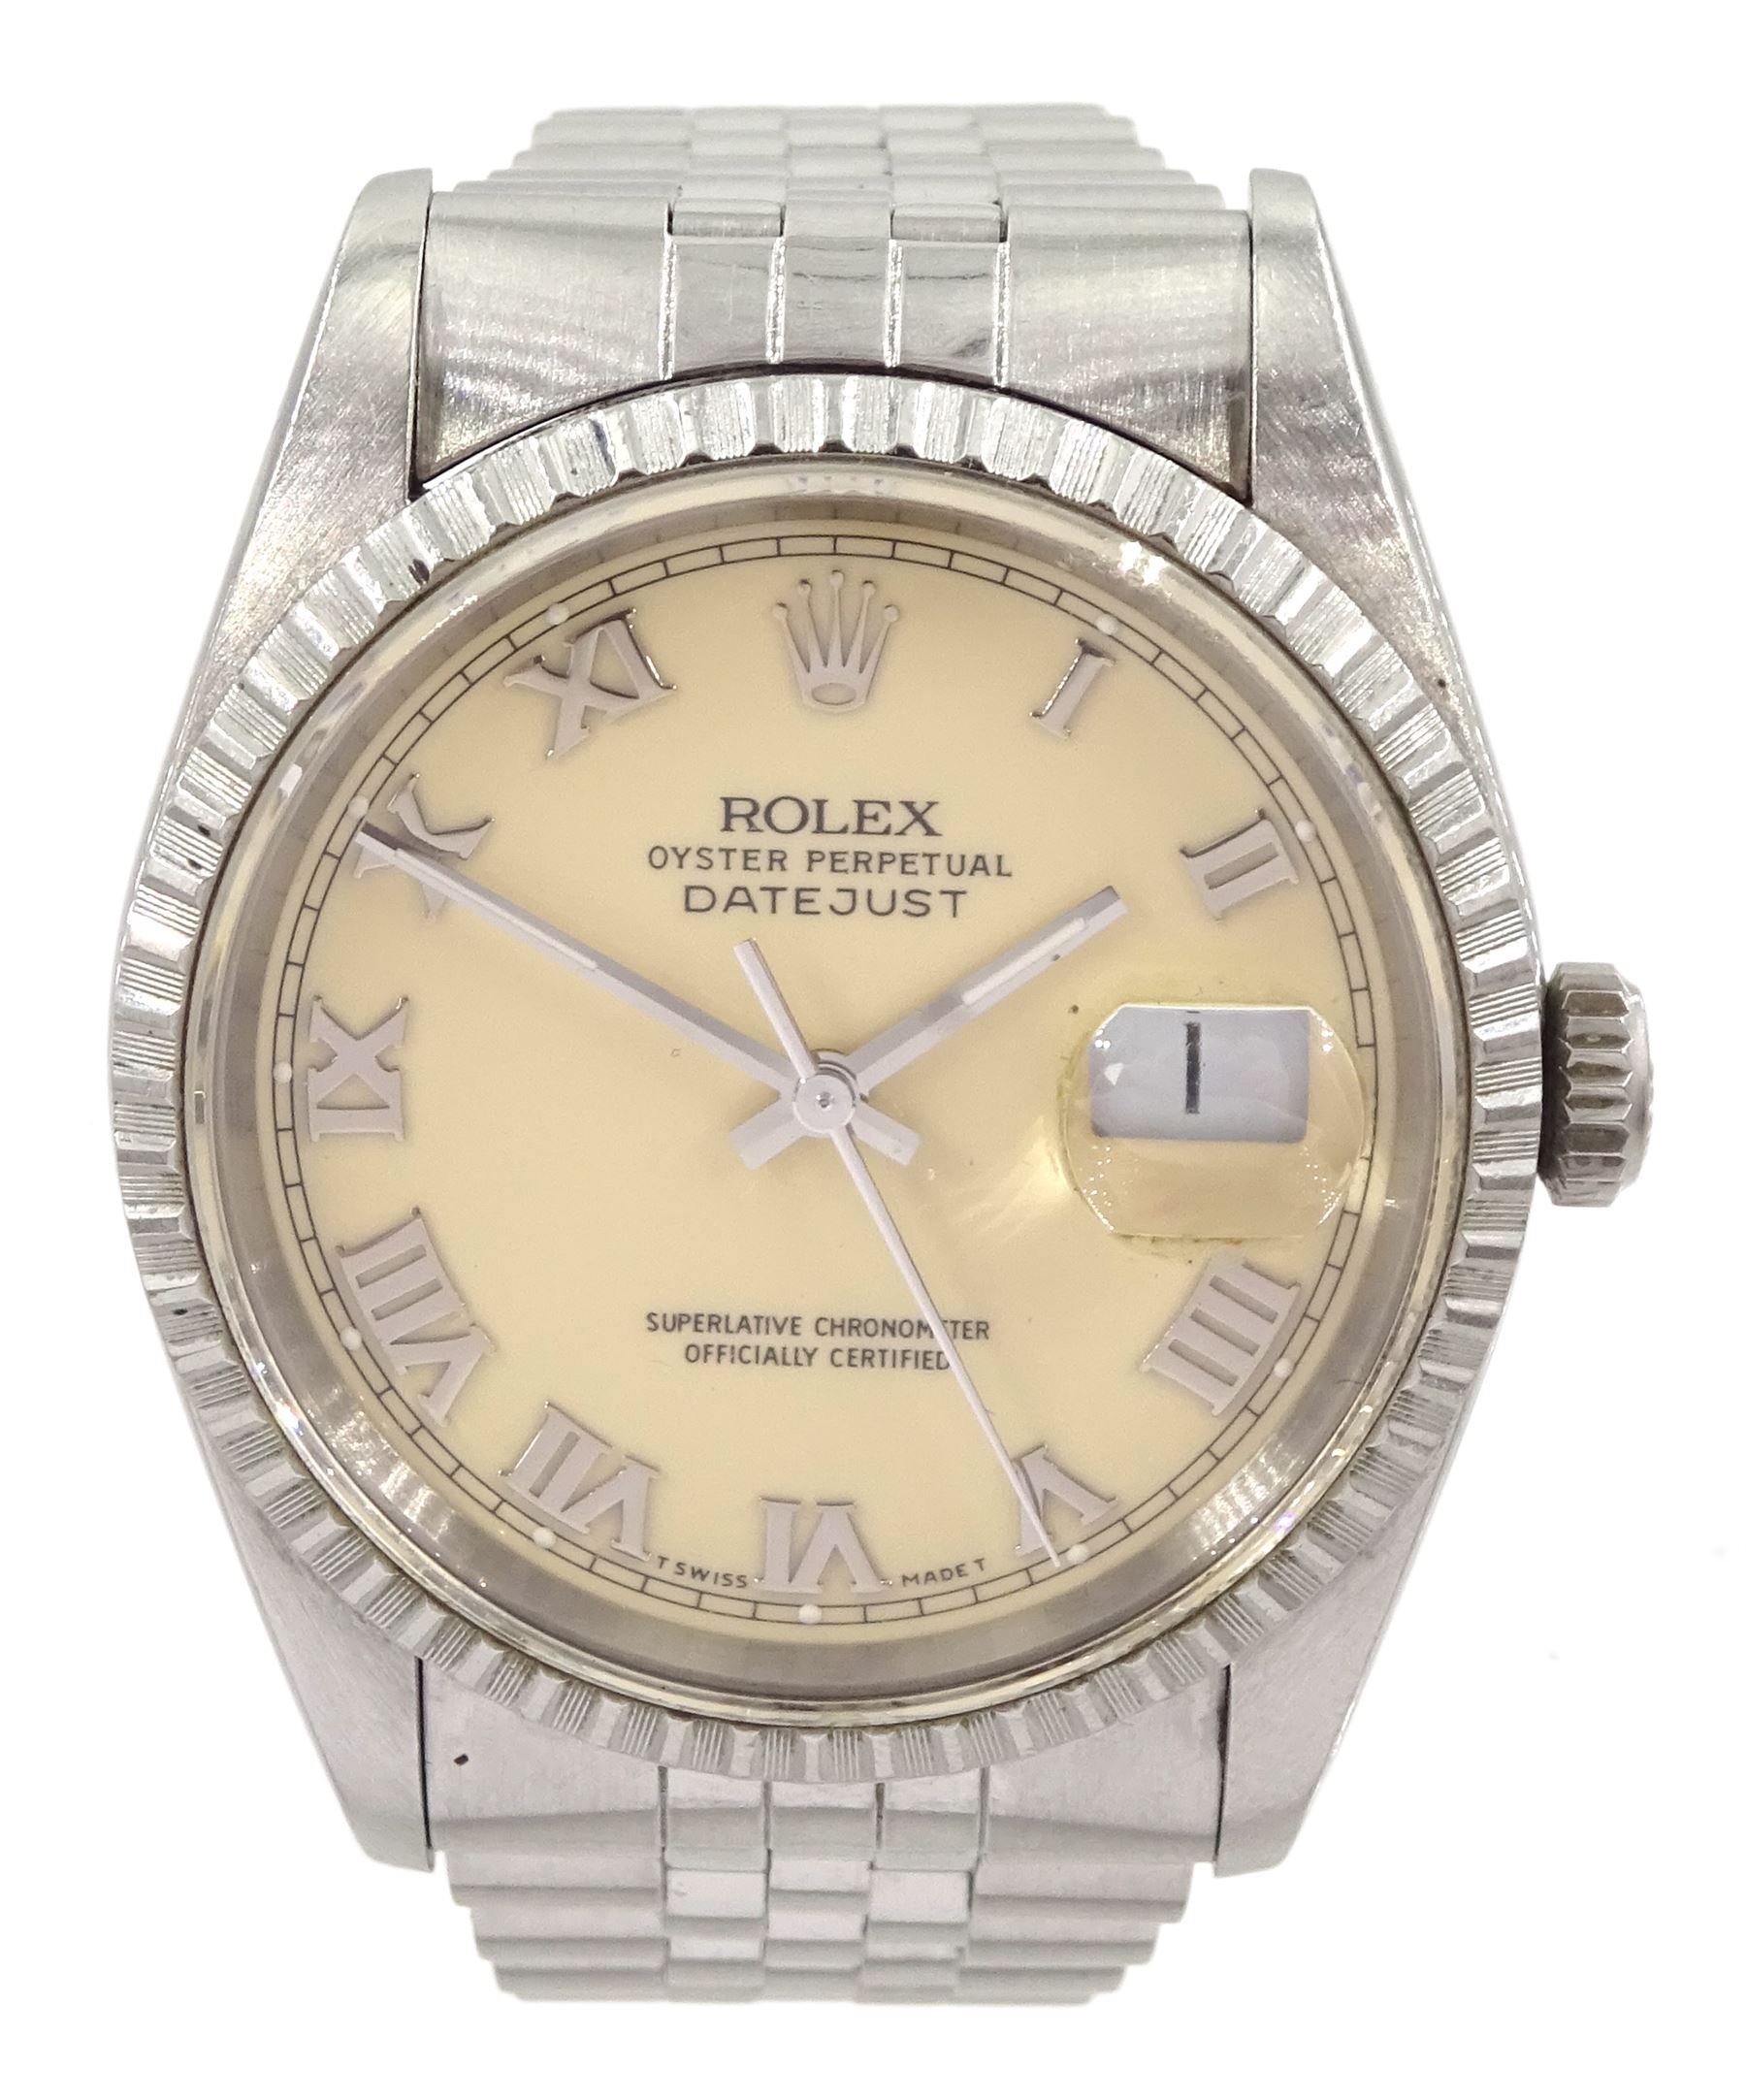 Rolex Oyster Perpetual Datejust gentleman's stainless steel automatic wristwatch